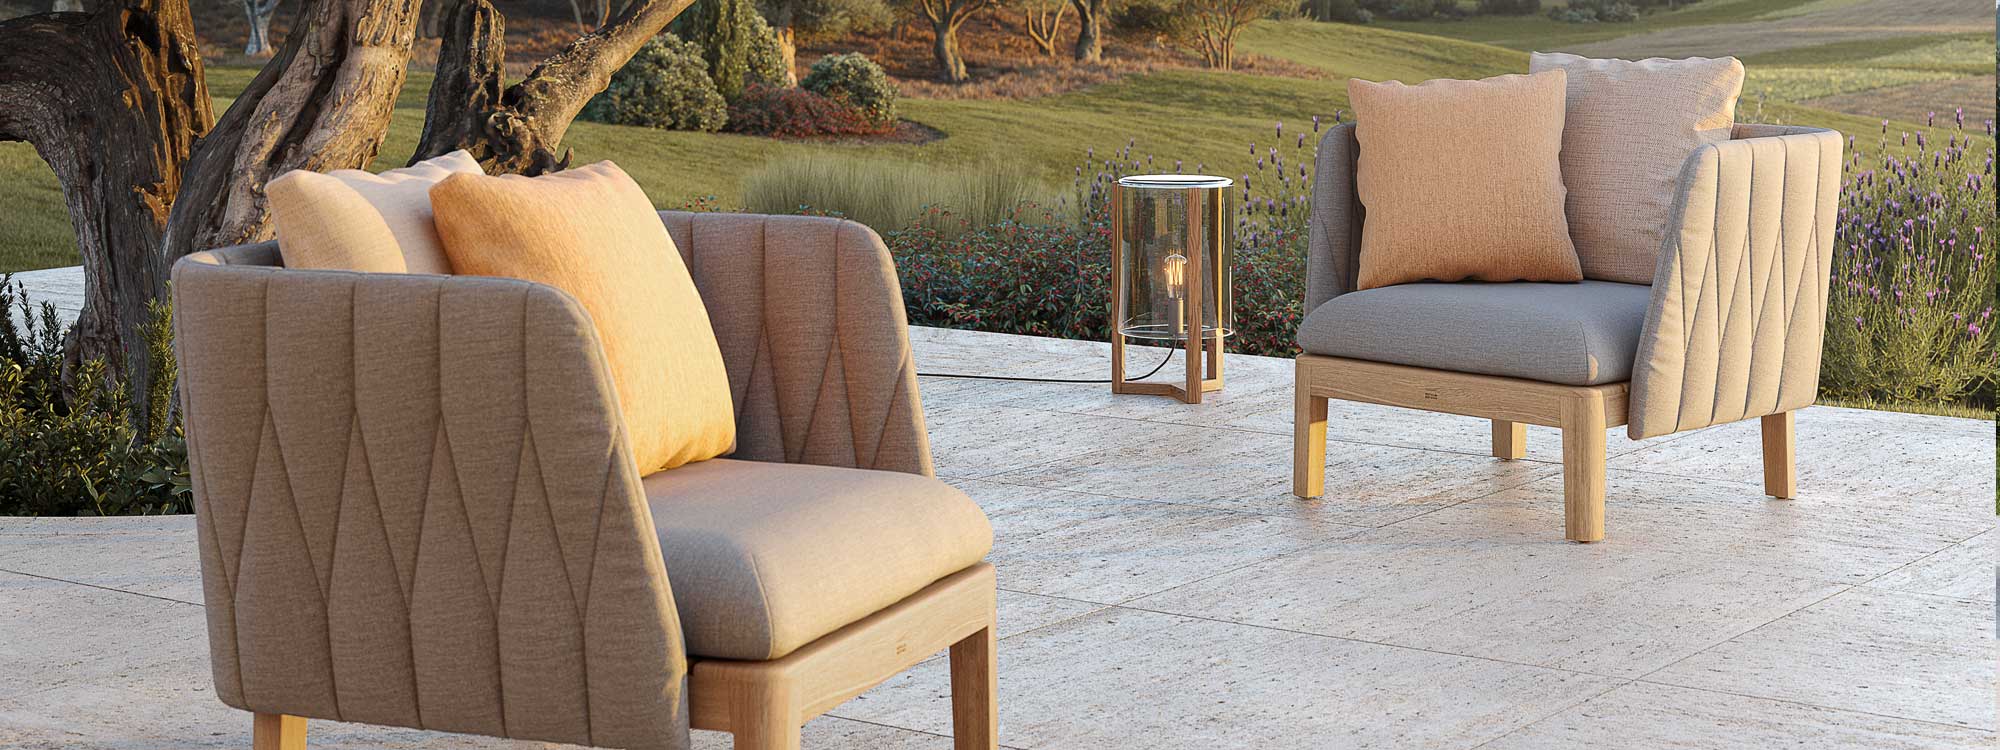 Pair of Calypso garden lounge chairs on terrace